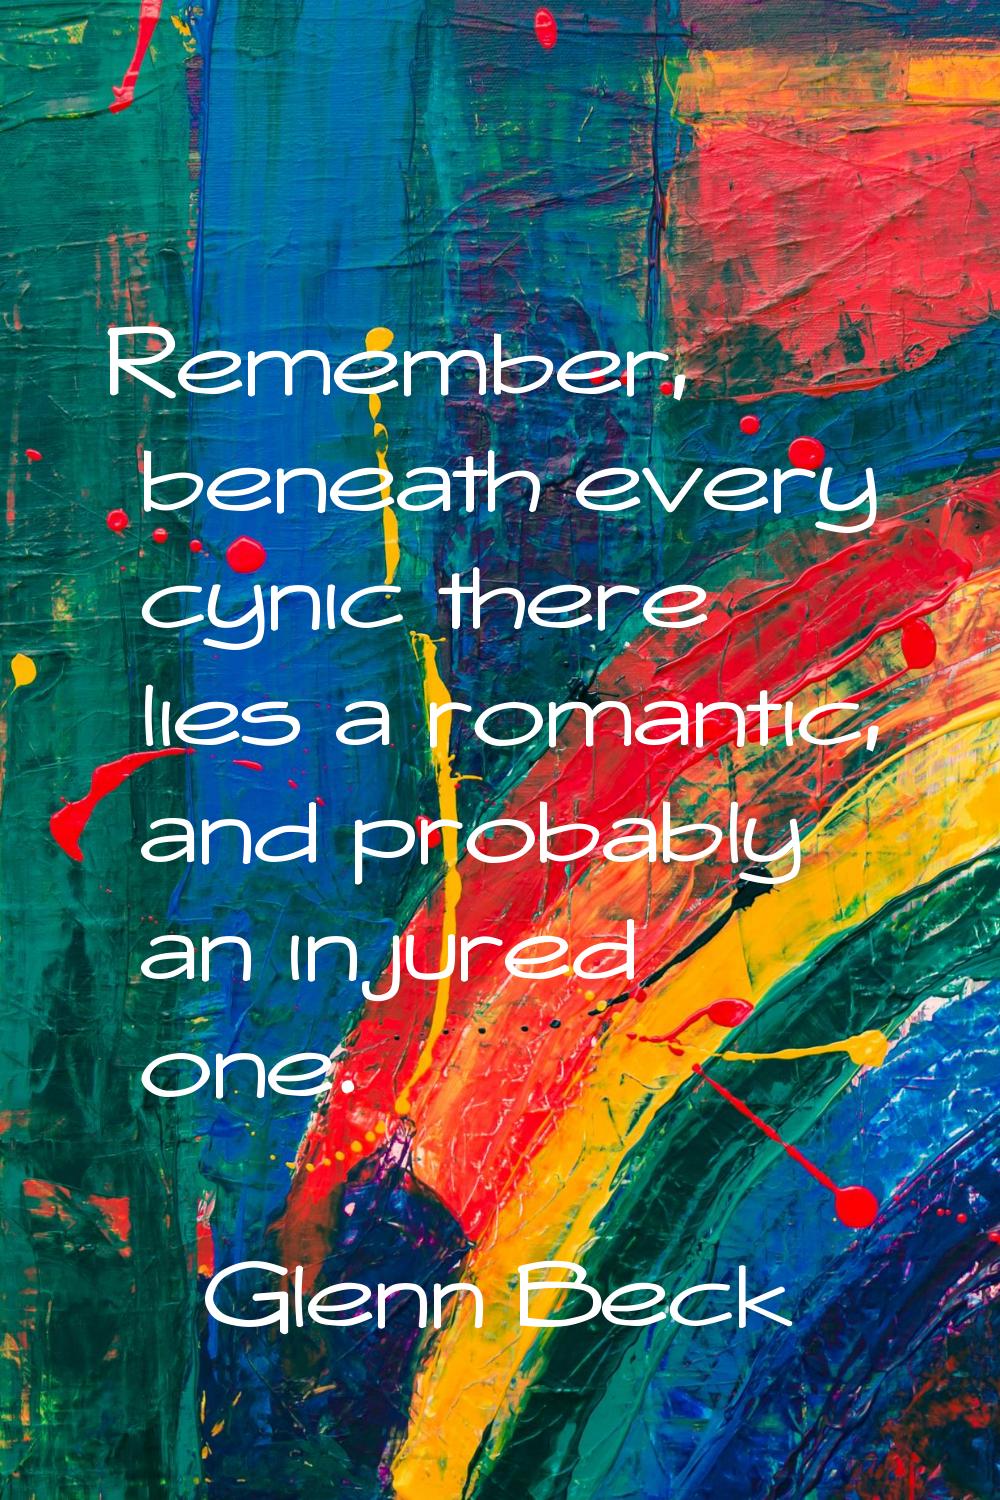 Remember, beneath every cynic there lies a romantic, and probably an injured one.